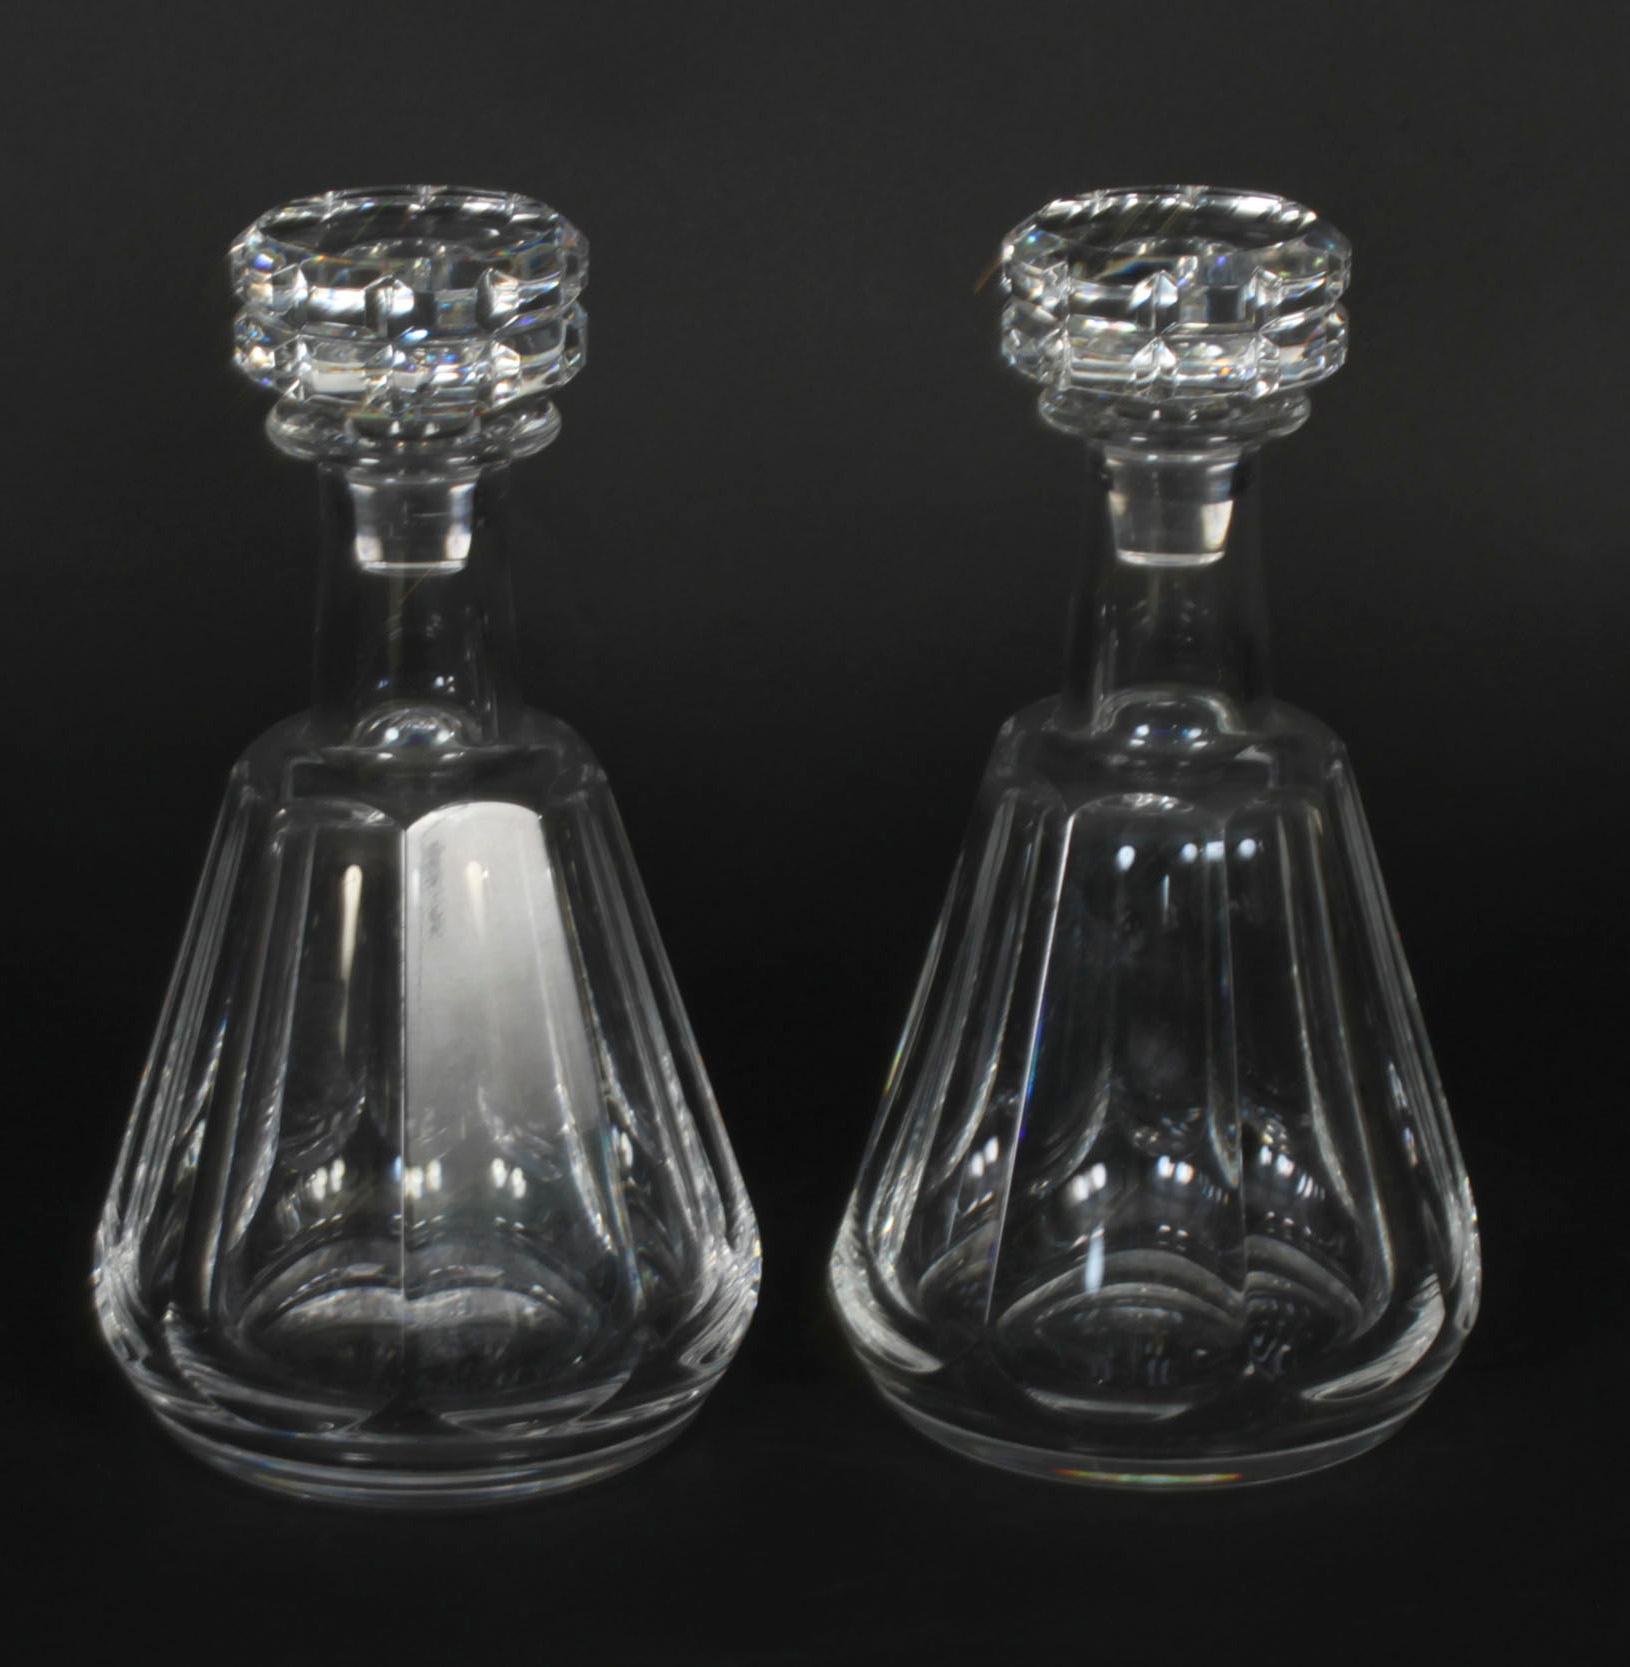 Vintage Pair of Harcourt Talleyrand Crystal Decanters by Baccarat Mid 20th C For Sale 4